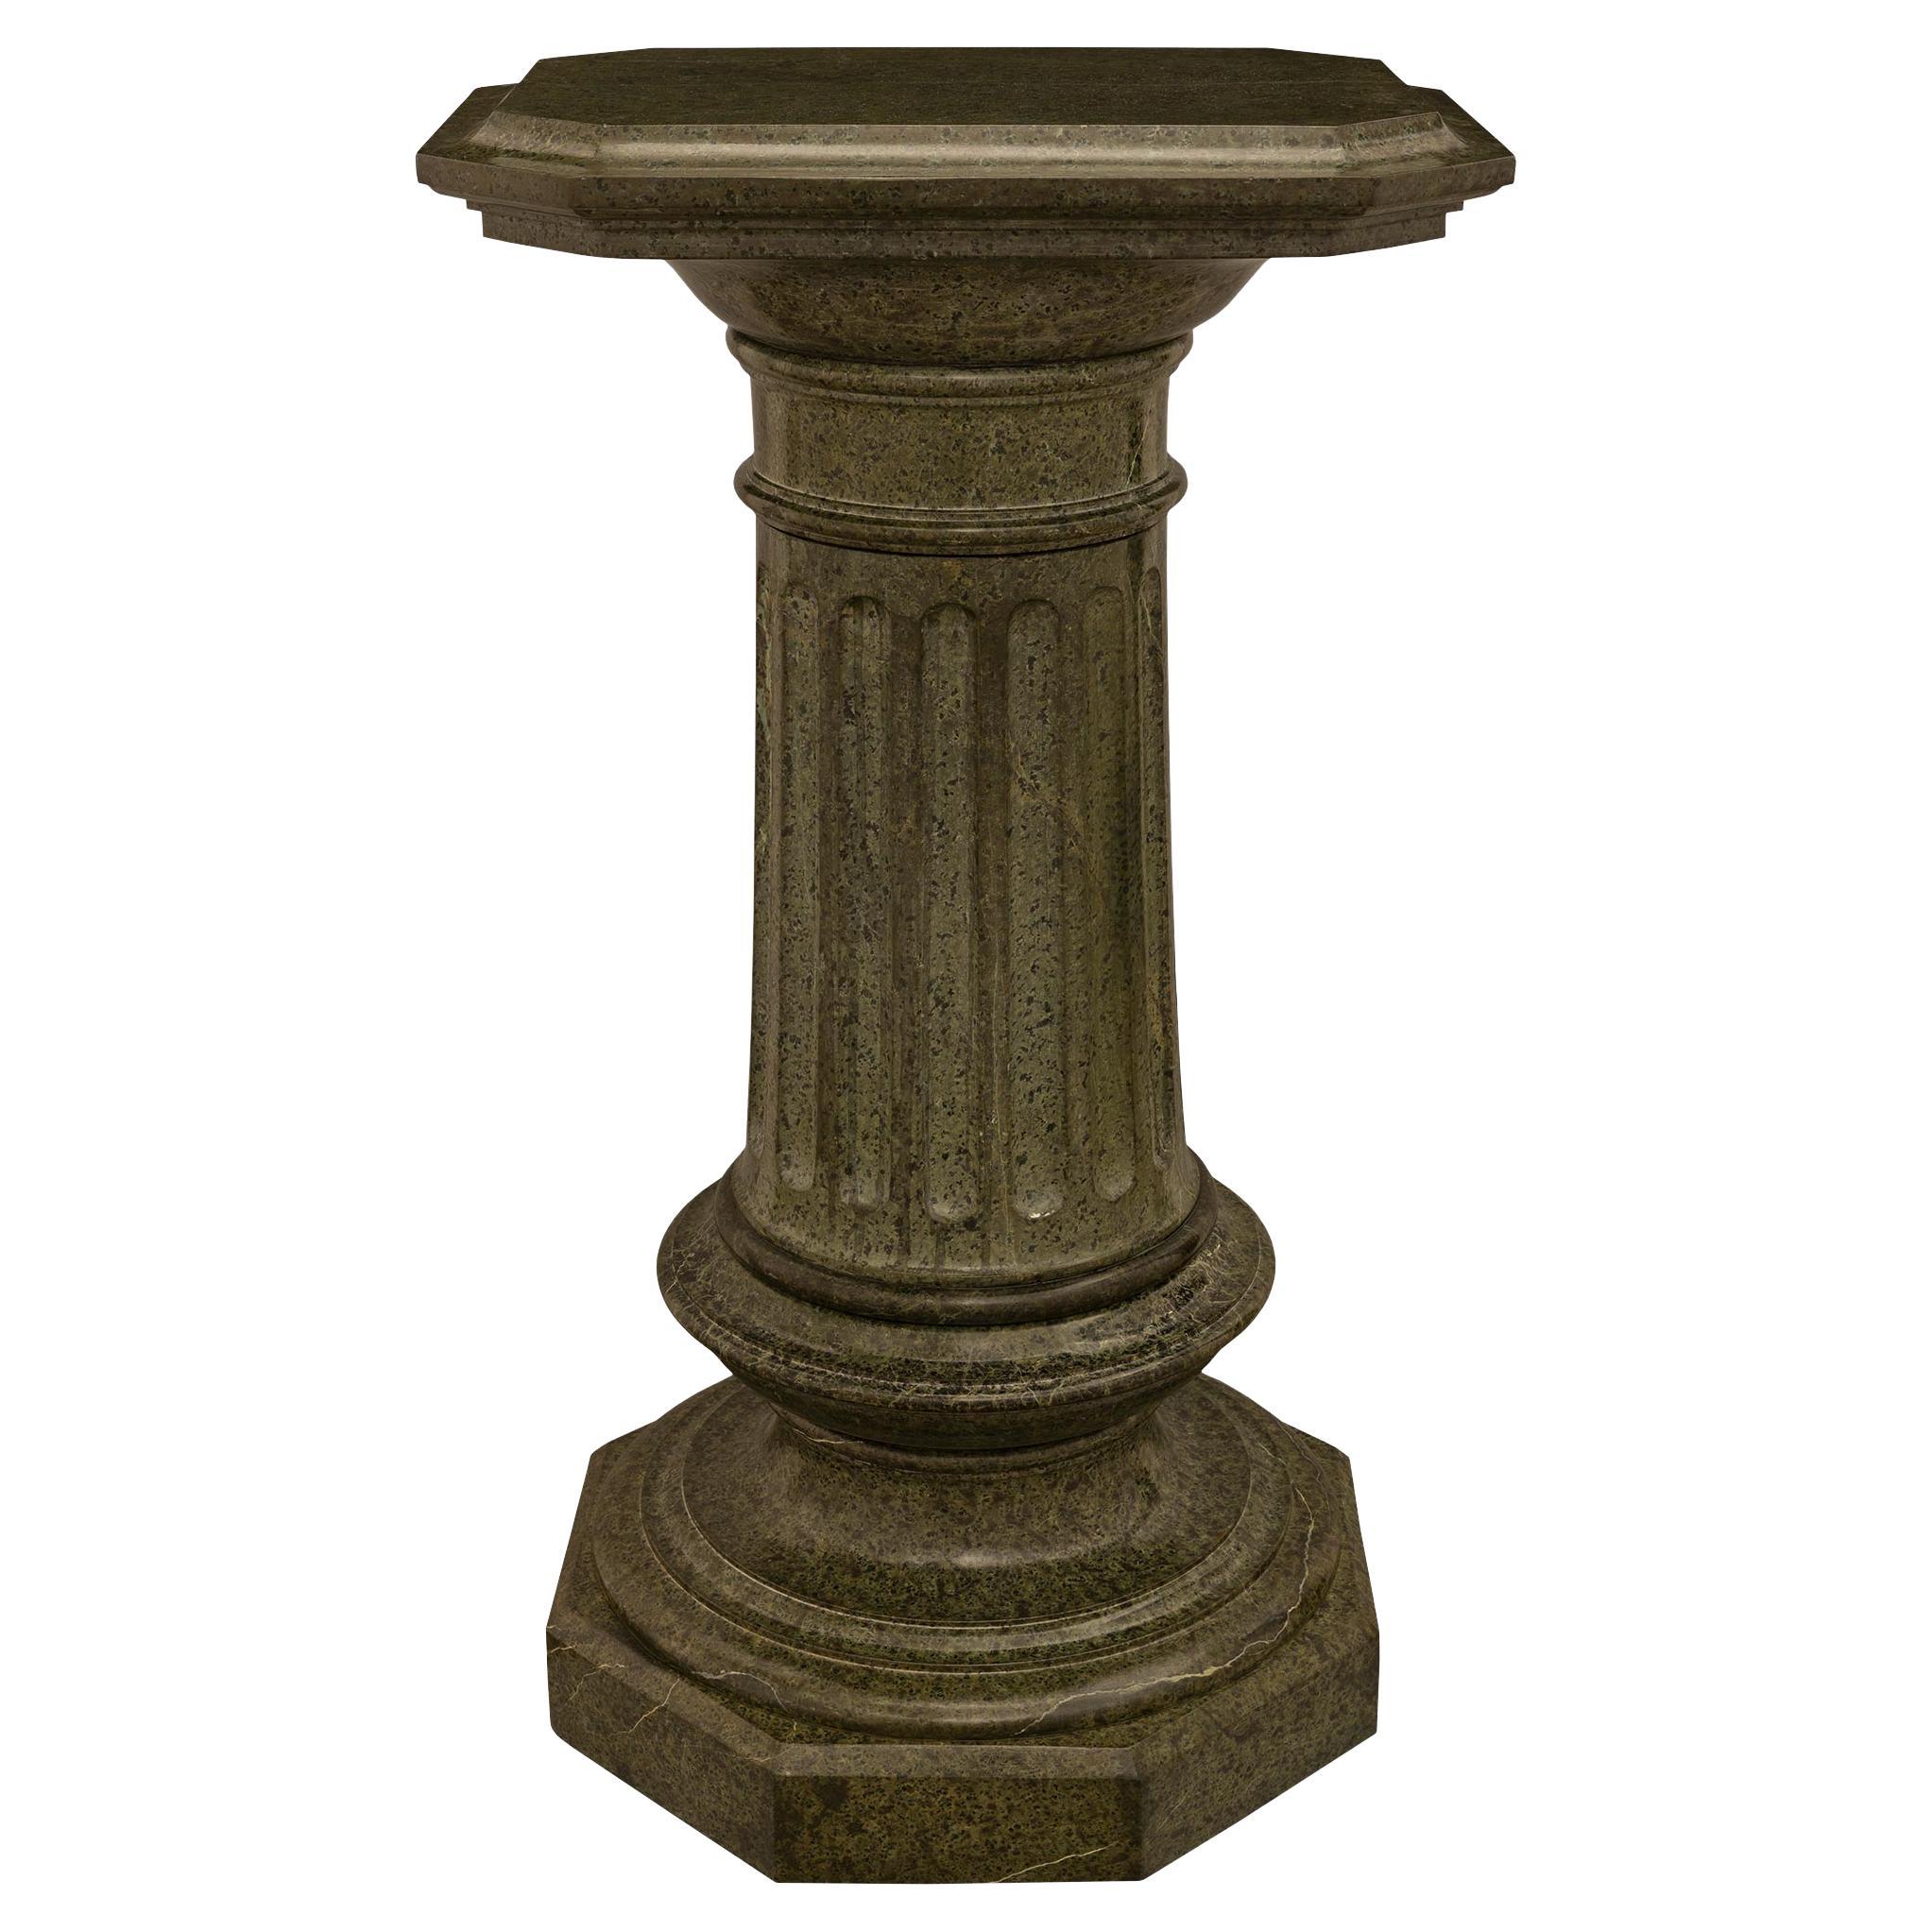 A large scaled Italian 19th century Vert de Patricia marble pedestal For Sale